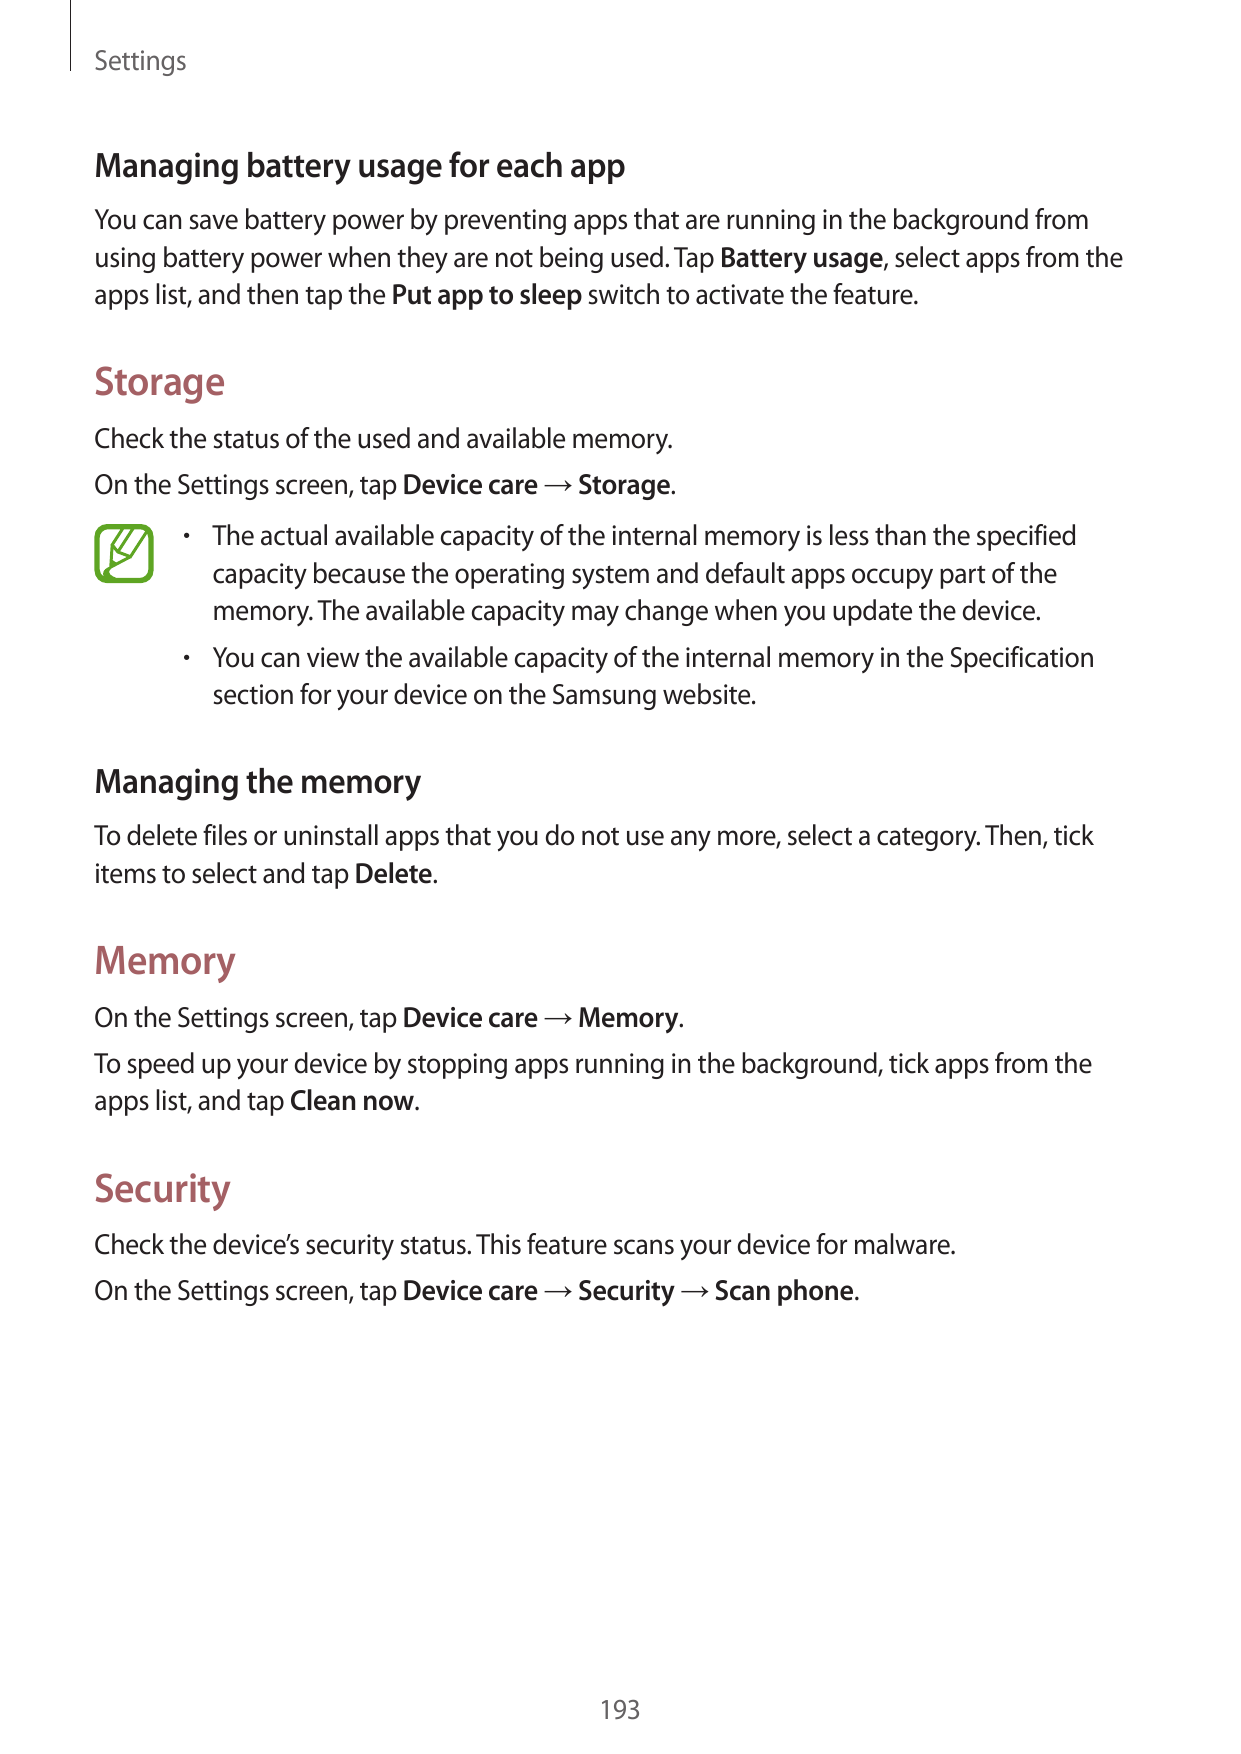 SettingsManaging battery usage for each appYou can save battery power by preventing apps that are running in the background from